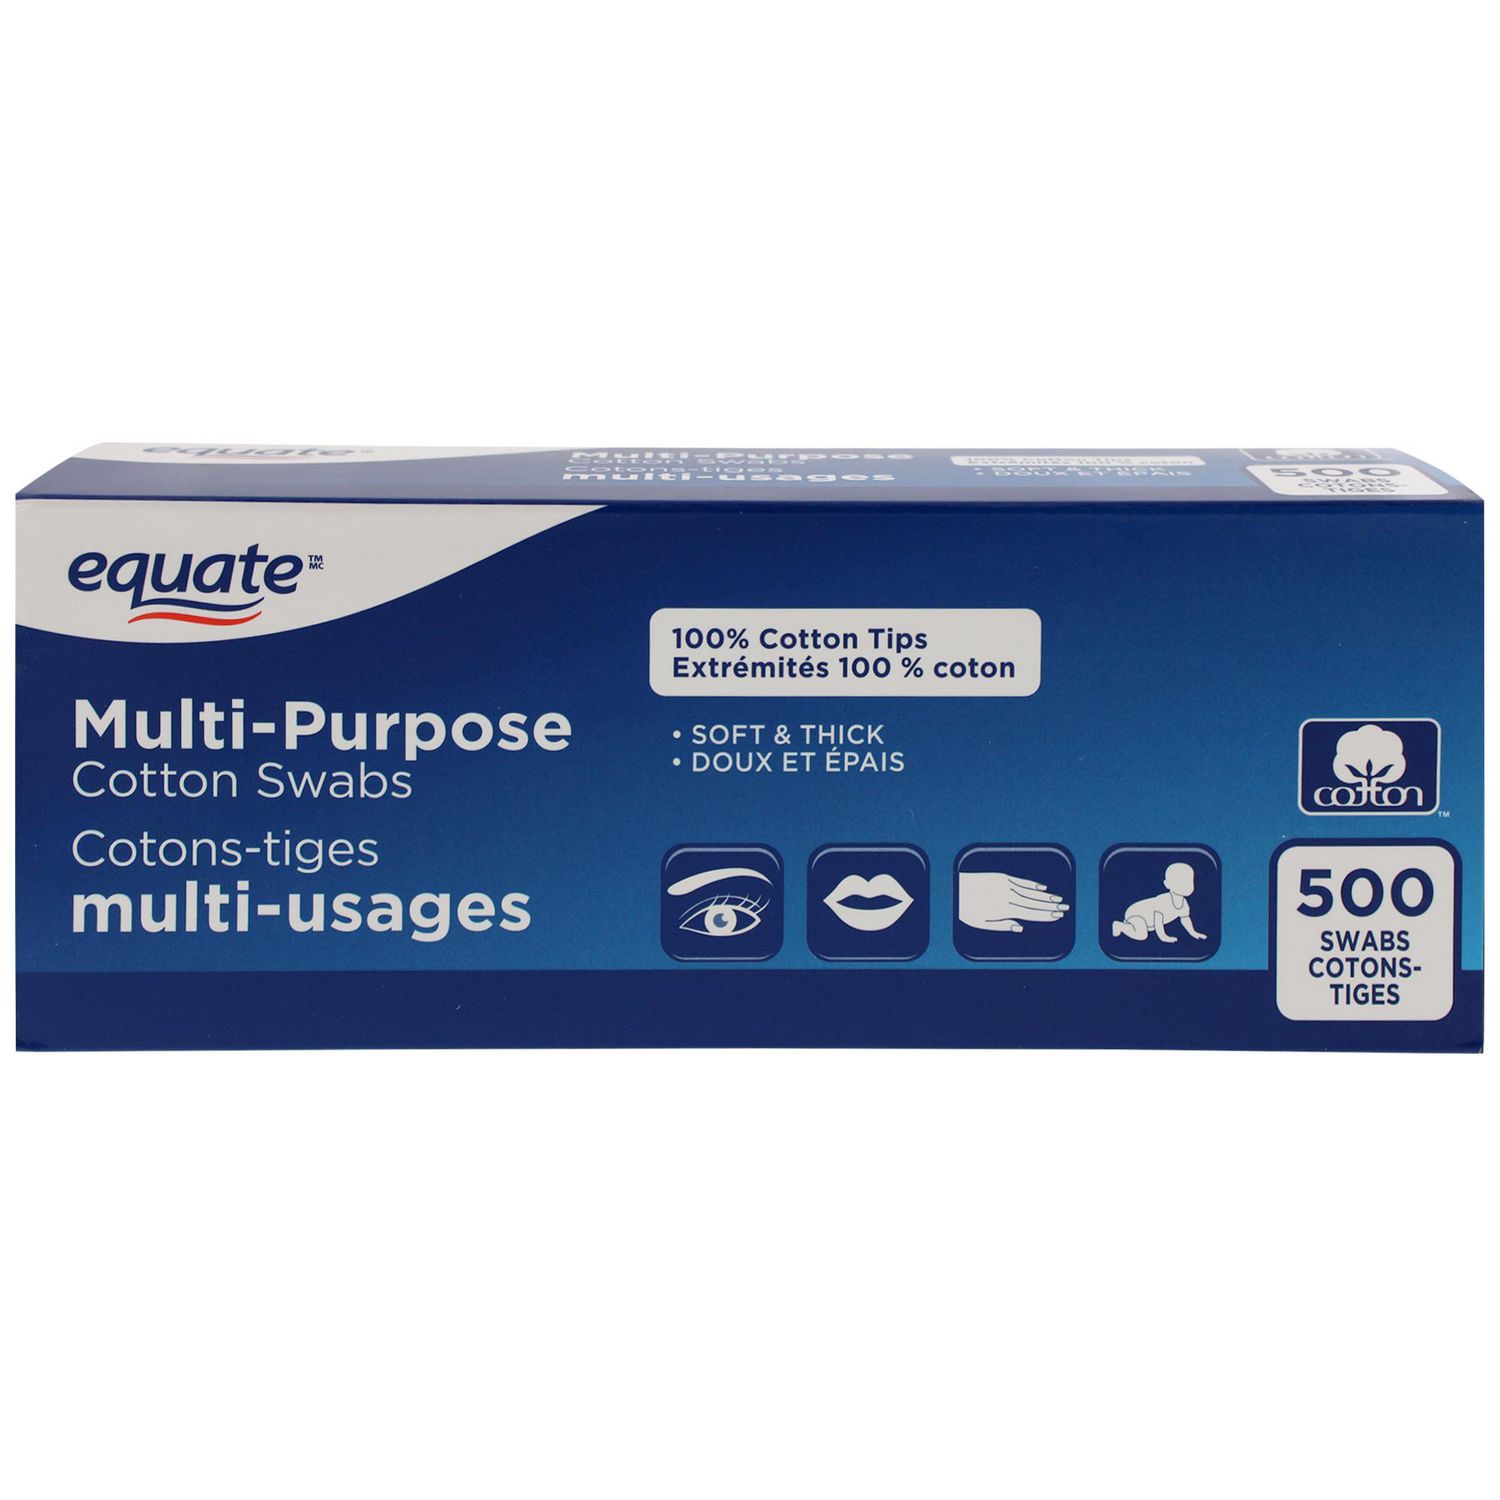 Equate Super Maxi Pads, 48 count pack 